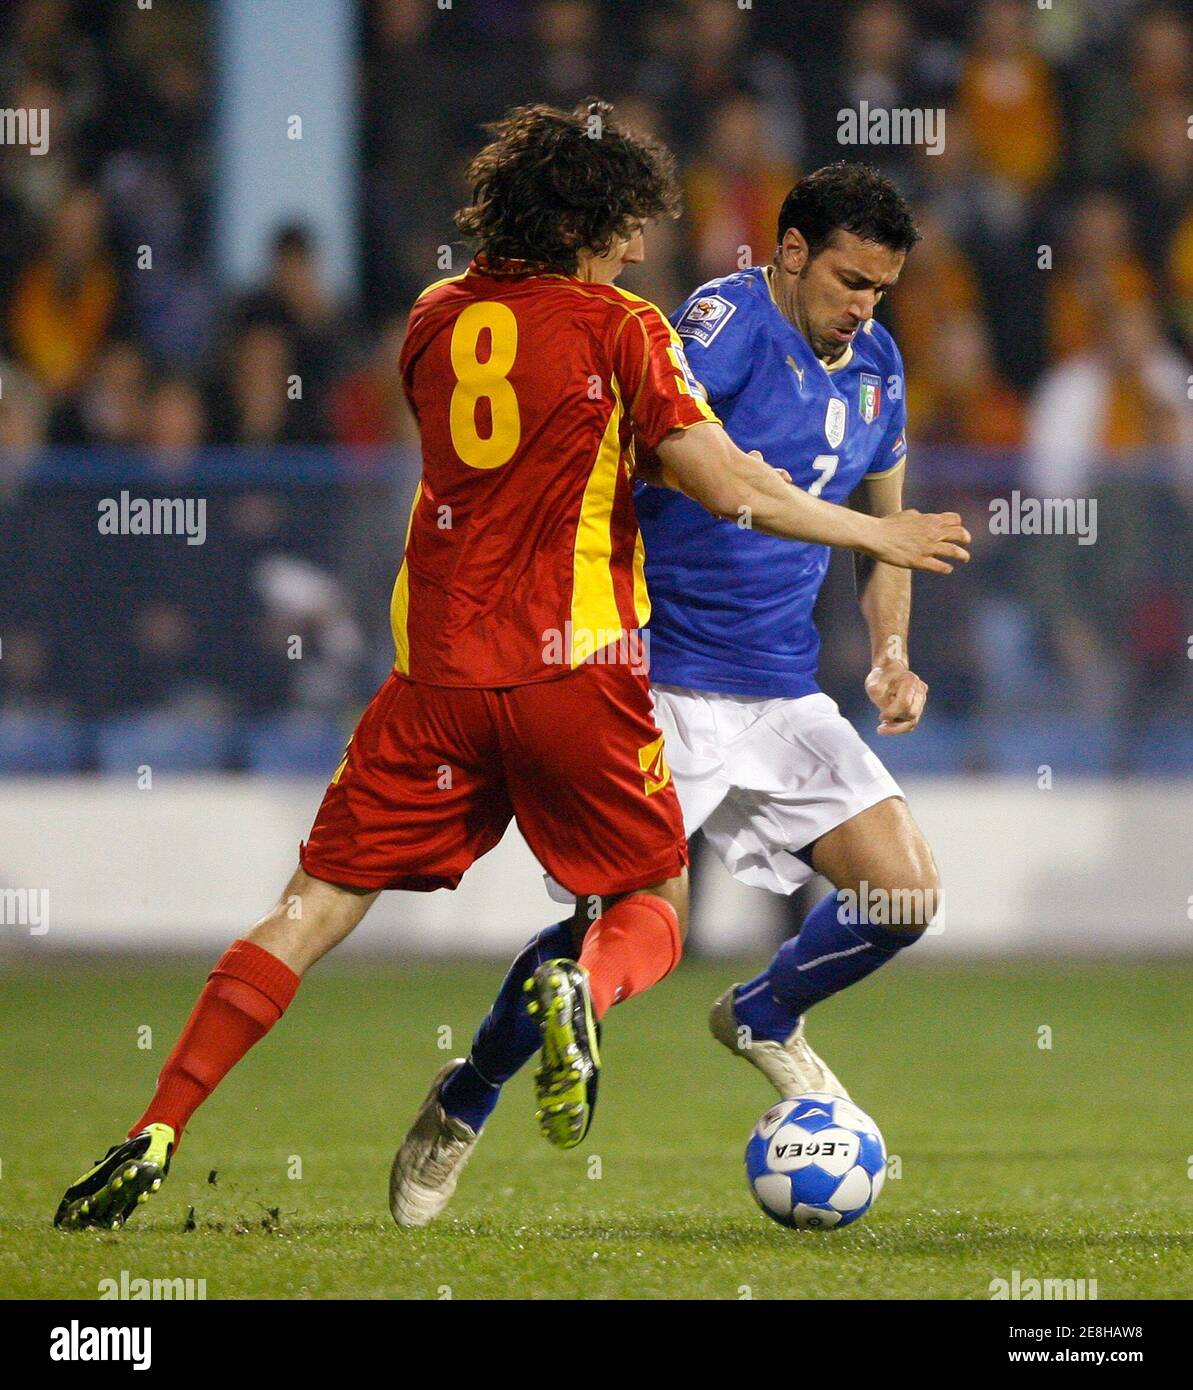 Italy's Fabio Quagliarella (R) is challenged by Montenegro's Stevan Jovetic during their 2010 World Cup qualifying soccer match in Podgorica March 28, 2009.  REUTERS/Ivan Milutinovic (MONTENEGRO SPORT SOCCER) Stock Photo